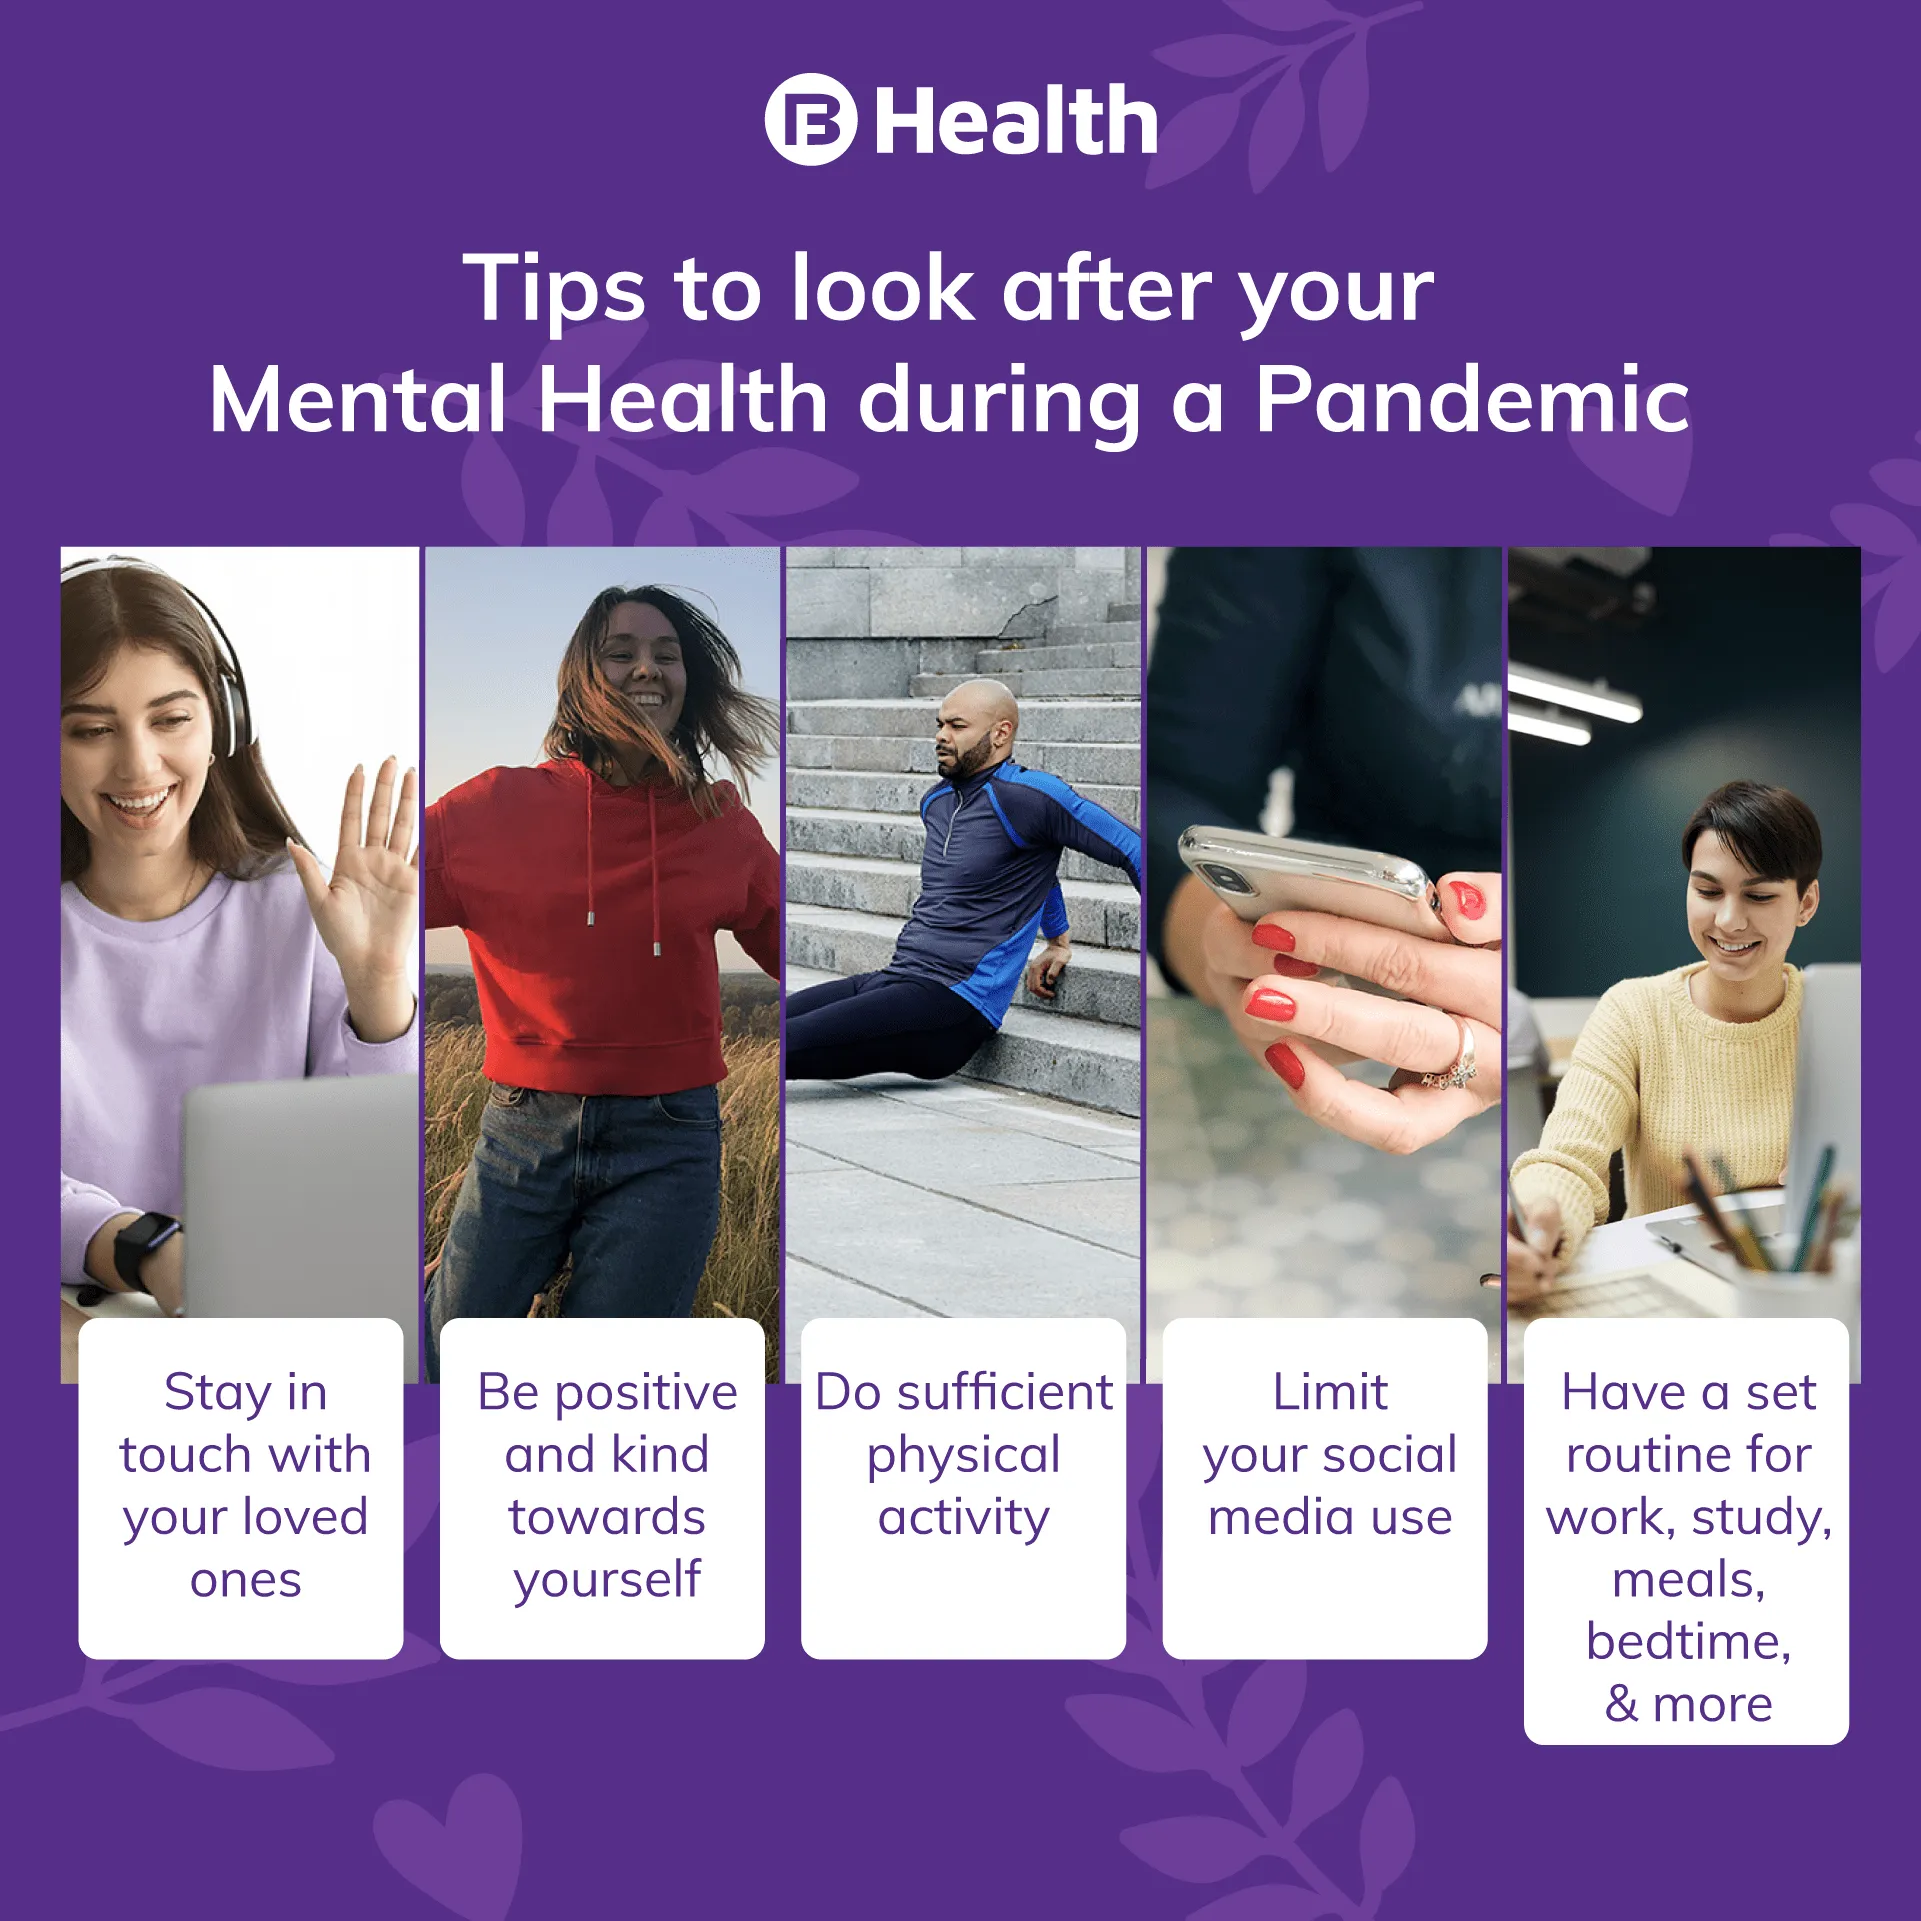 Tips for mental health during pandemic